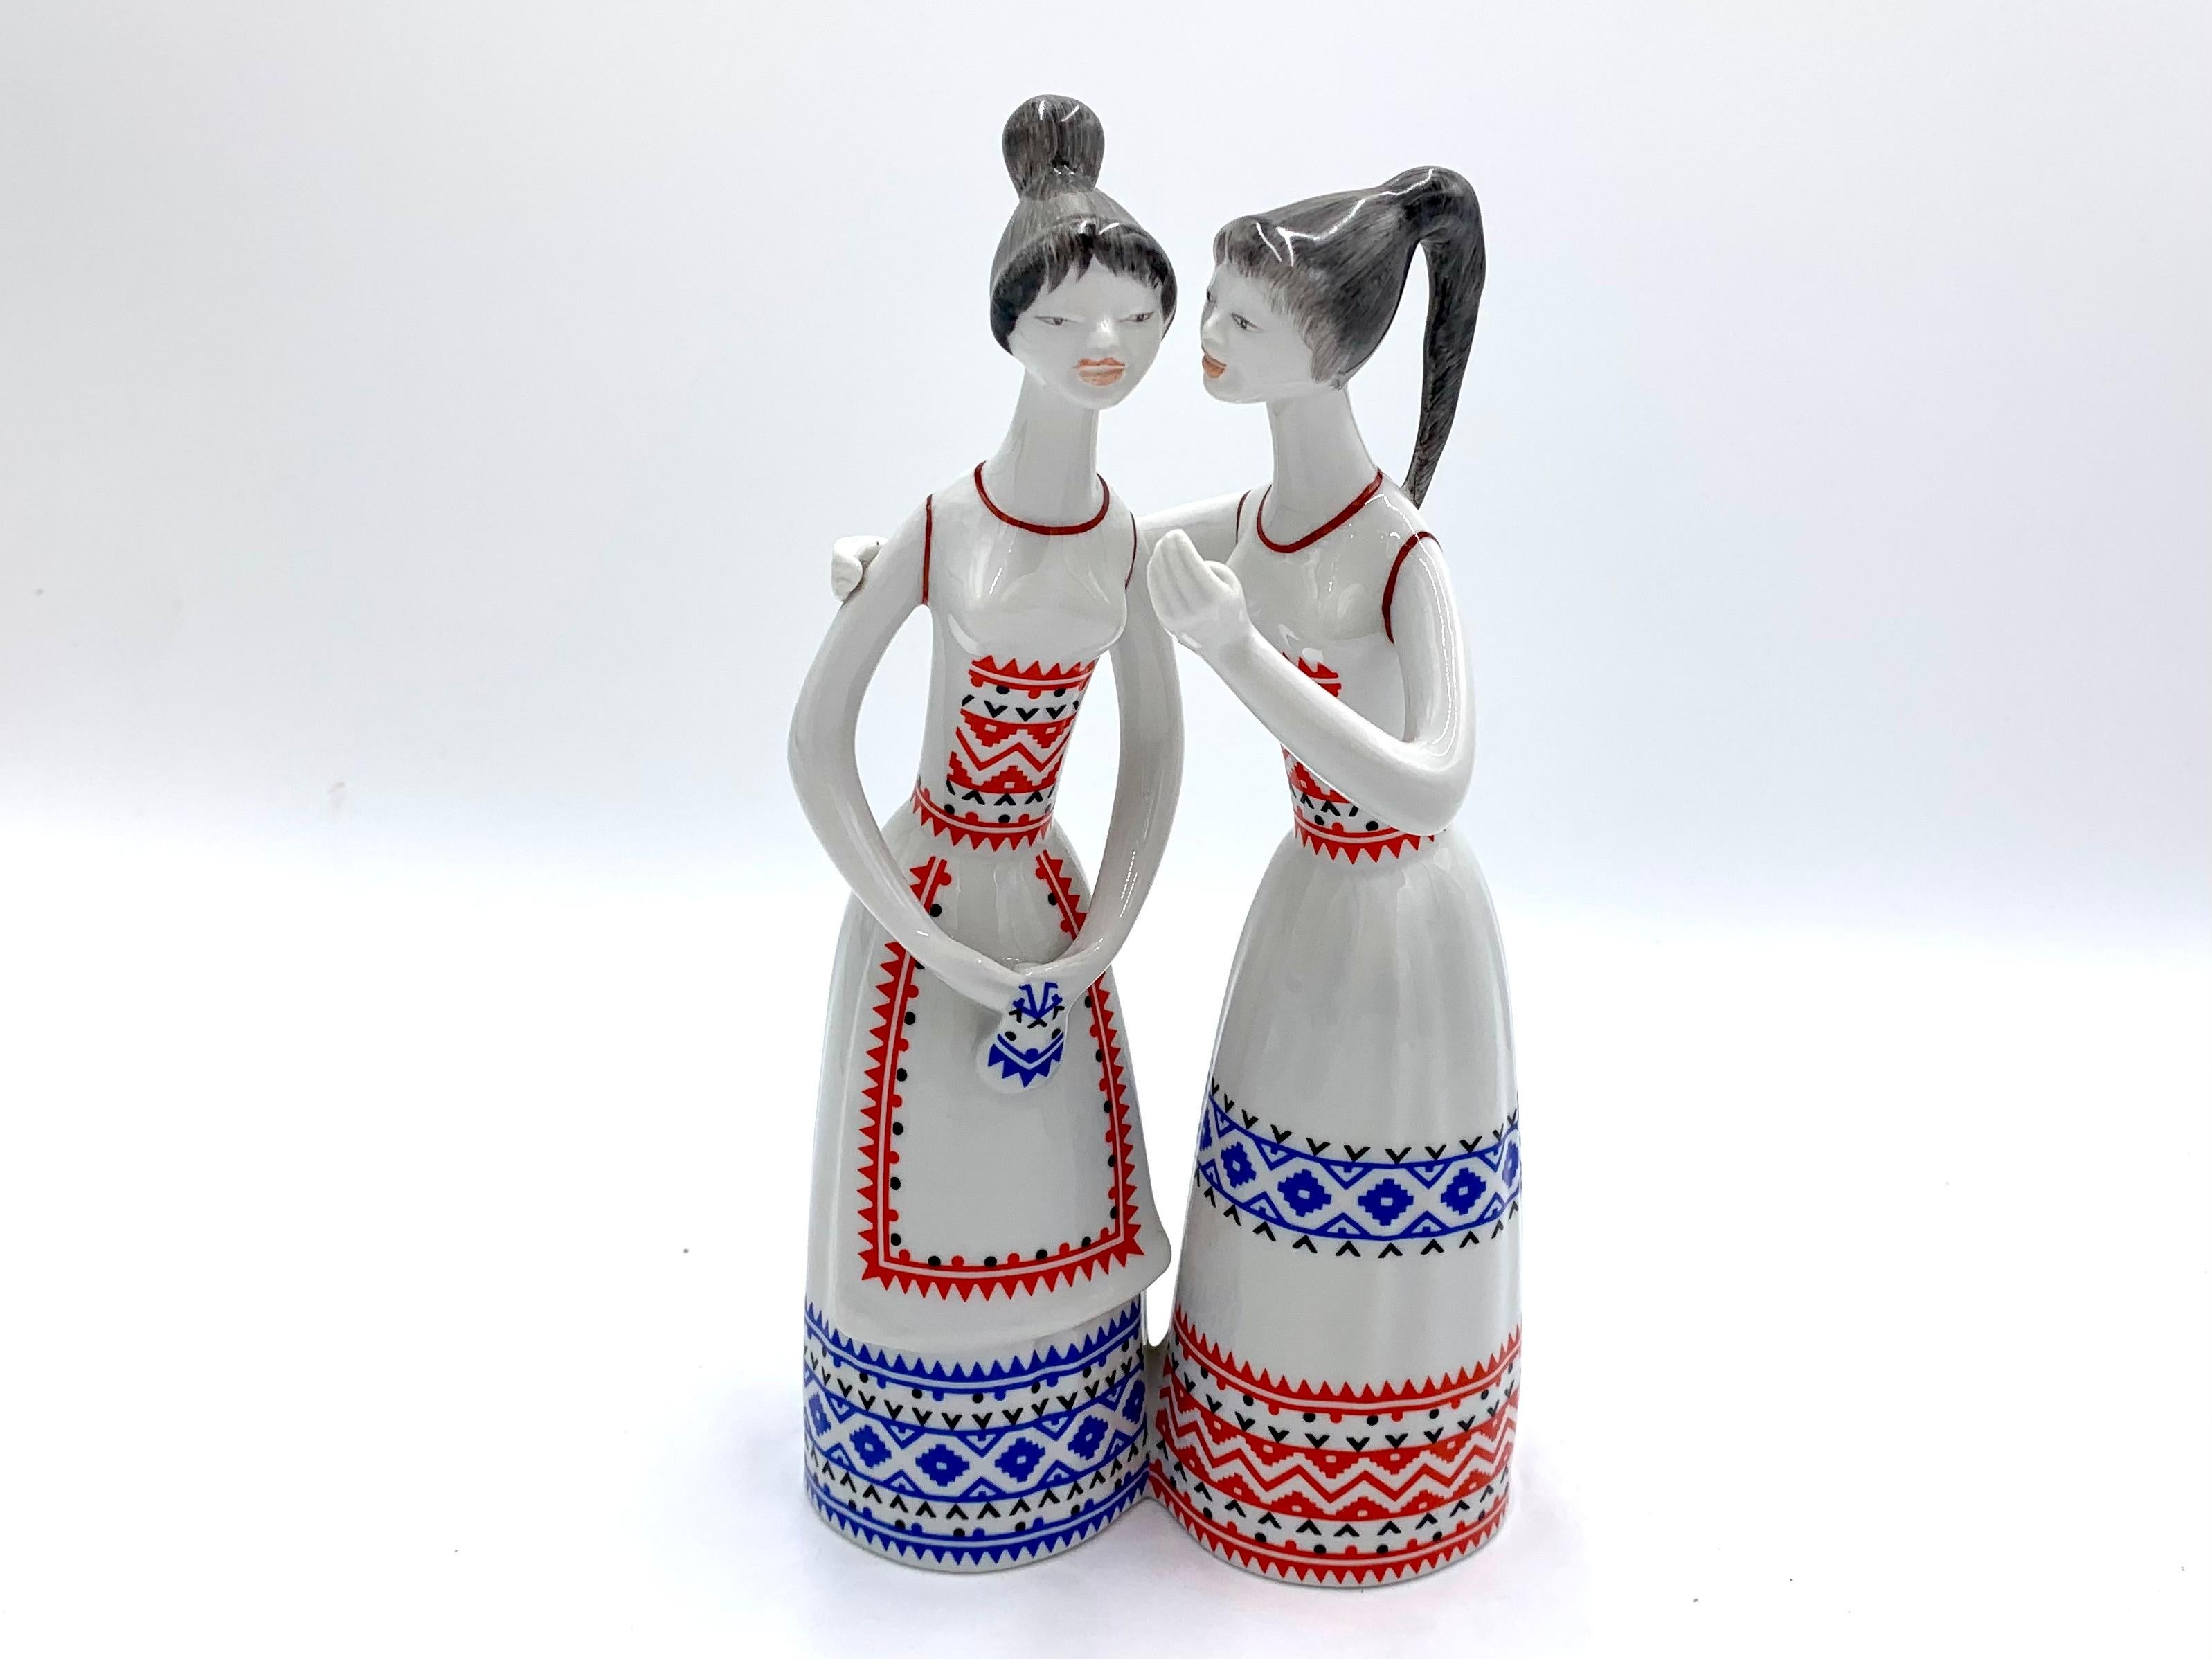 A tall porcelain figurine depicting gossiping women in folk dresses with embroidery. Signed Hollohaza. Designed in the 1960s by Marta J Seregely.

High-quality porcelain. Height 23 cm. Very good condition.